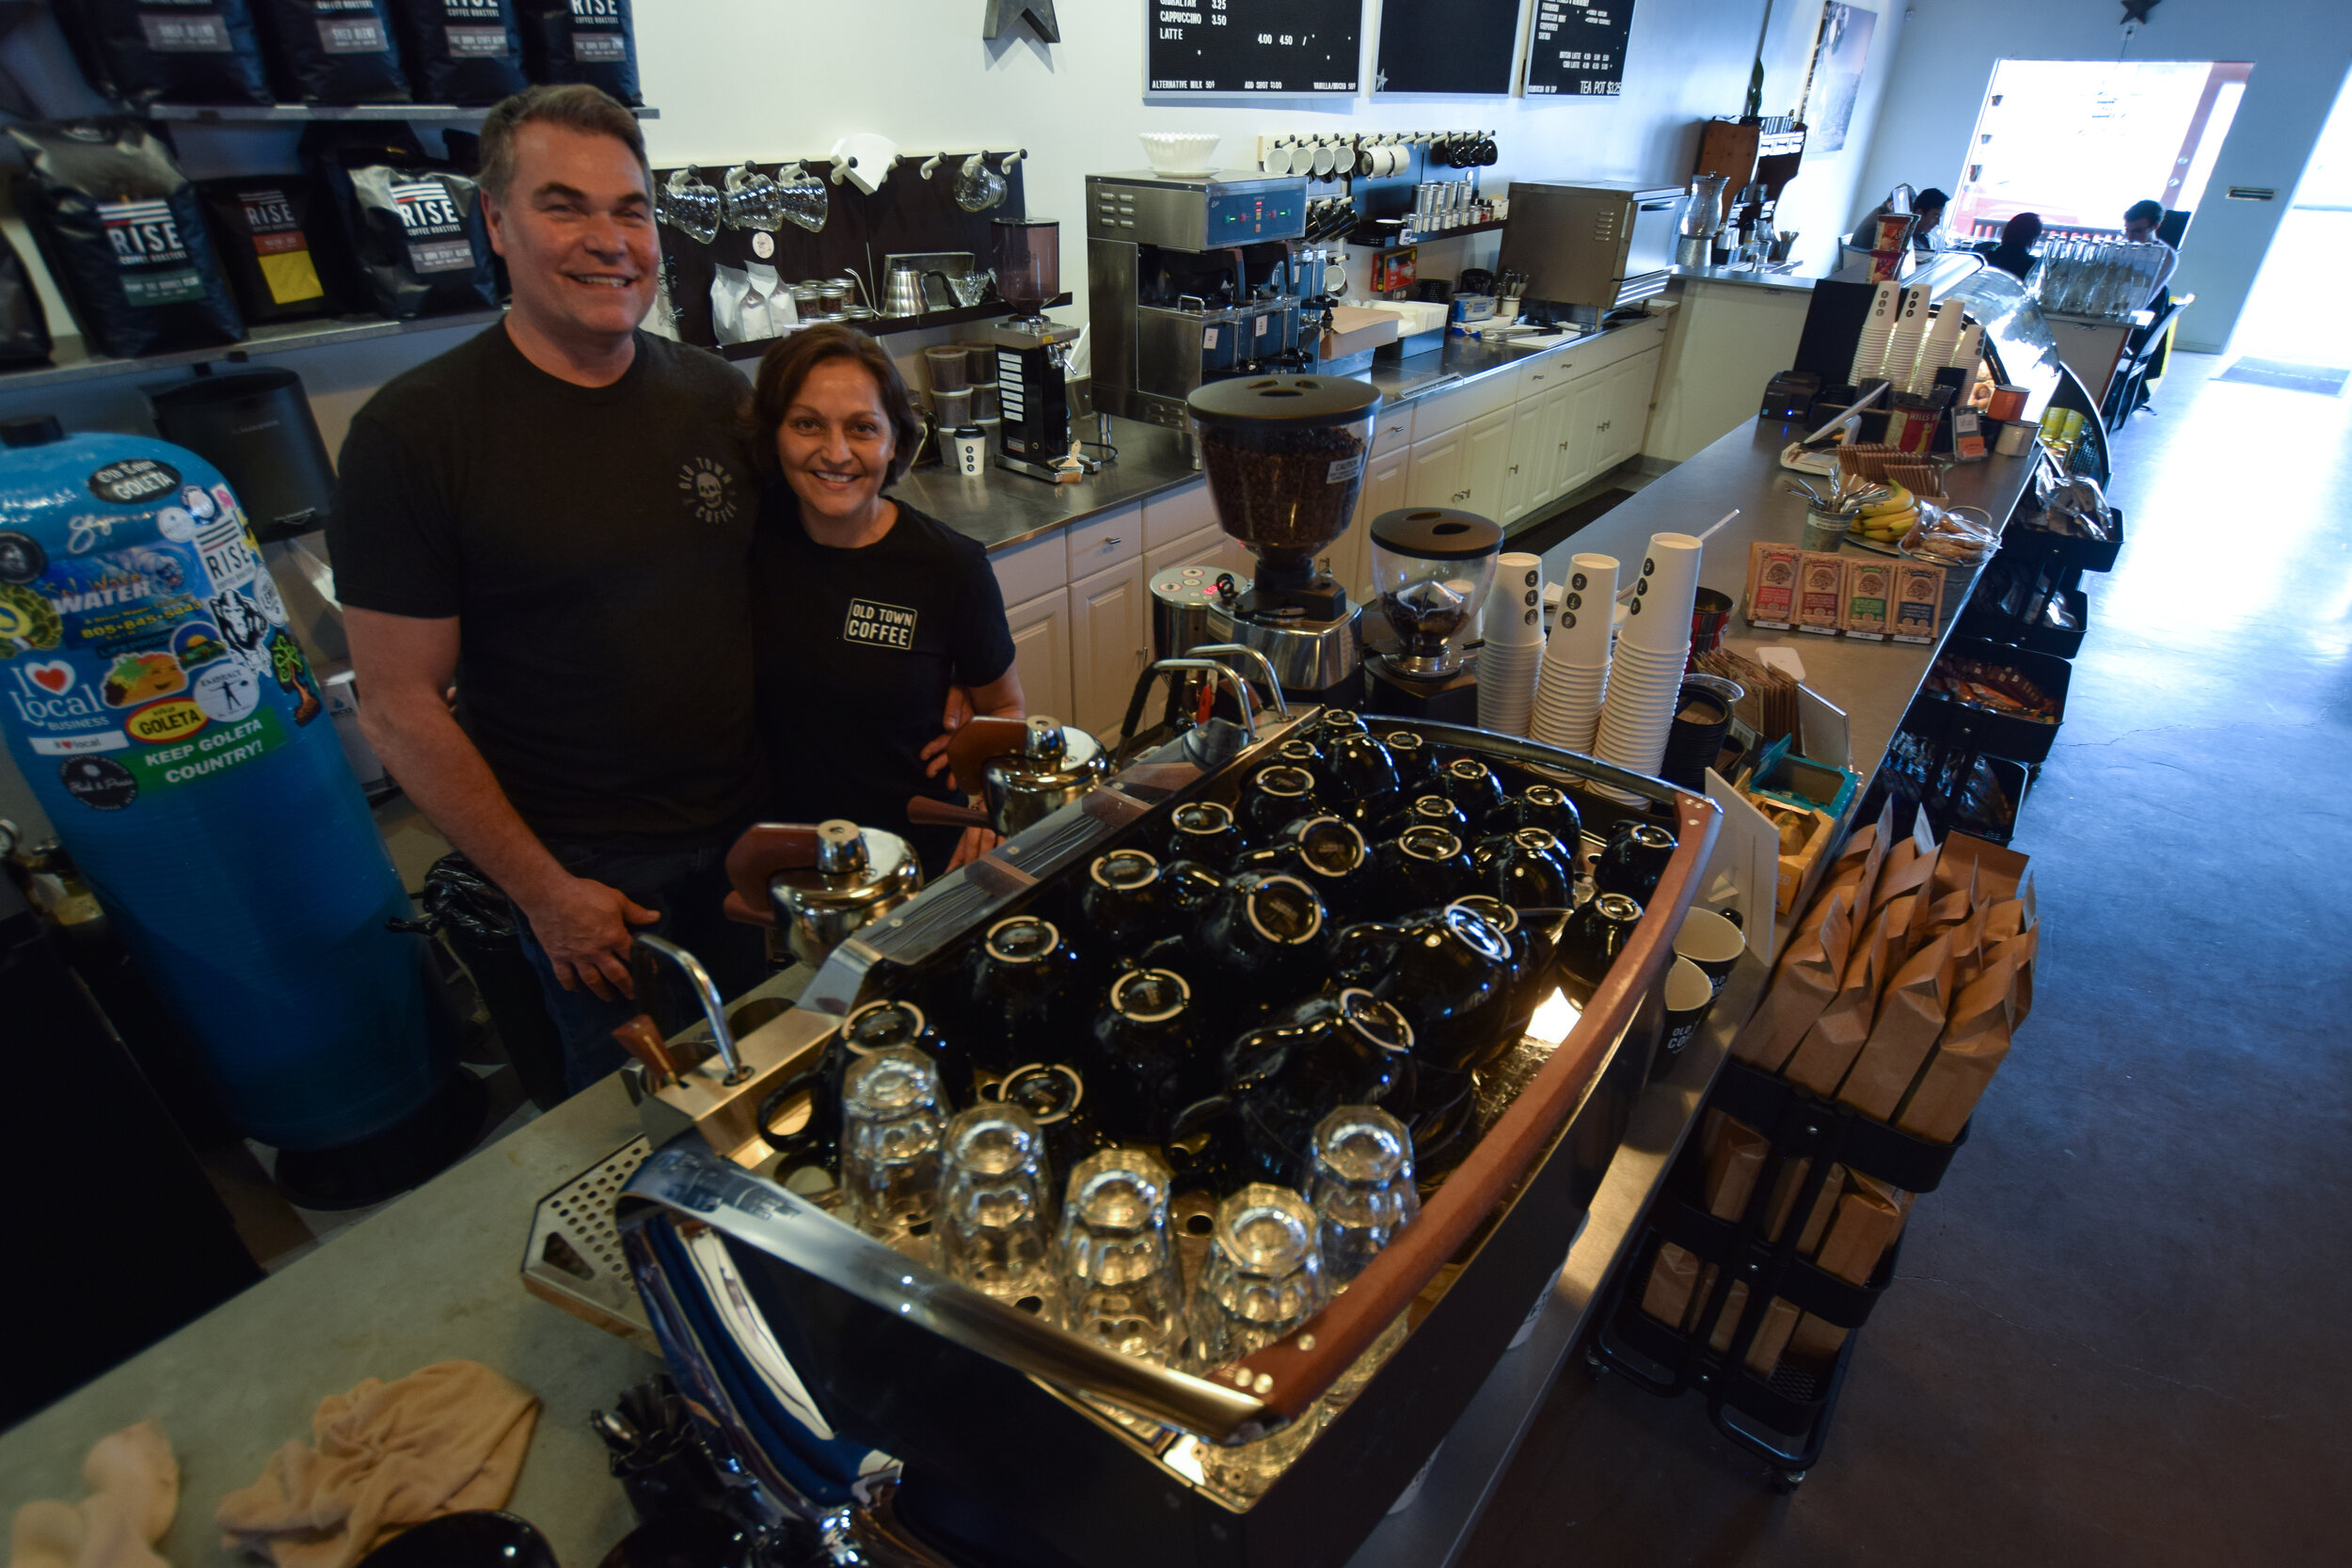  Tim and Rachel Ward, owners of Old Town Coffee in Goleta, featuring their one of a kind Slayer Steam Espresso Machine 